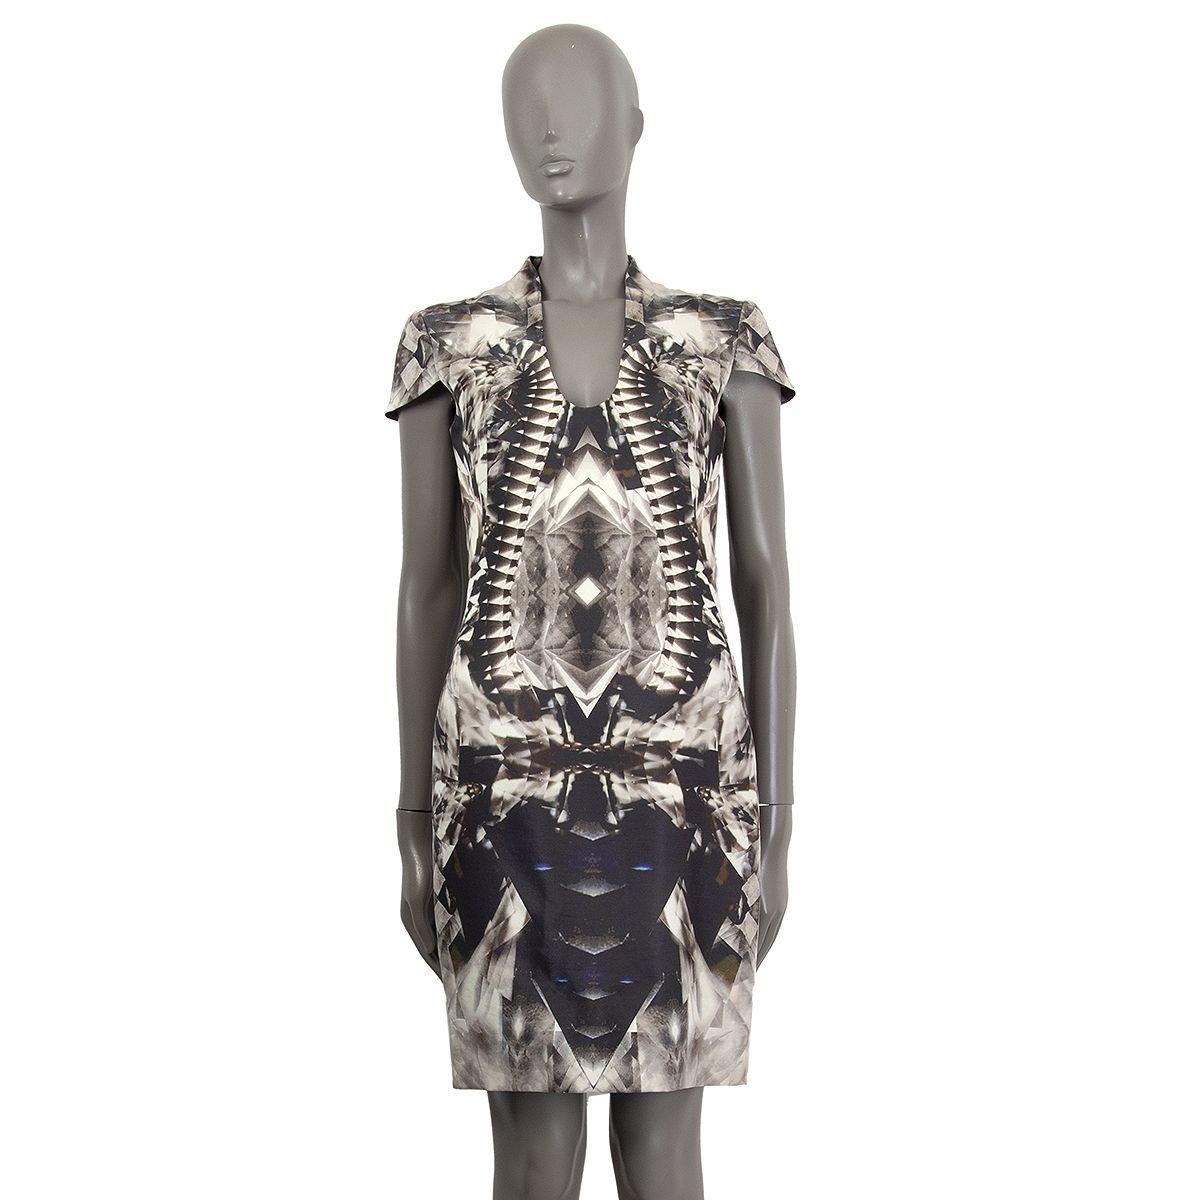 Alexander McQueen skeleton kaleidoscope dress in grey

White, black and dark taupe wool (54%), silk (41%) and nyon (6%) with a subtle sheen

Opens with a zipper in the back. Lined in silk (100%) 
Sizes: 40 and 42
Made in Italy
Excellent condition,